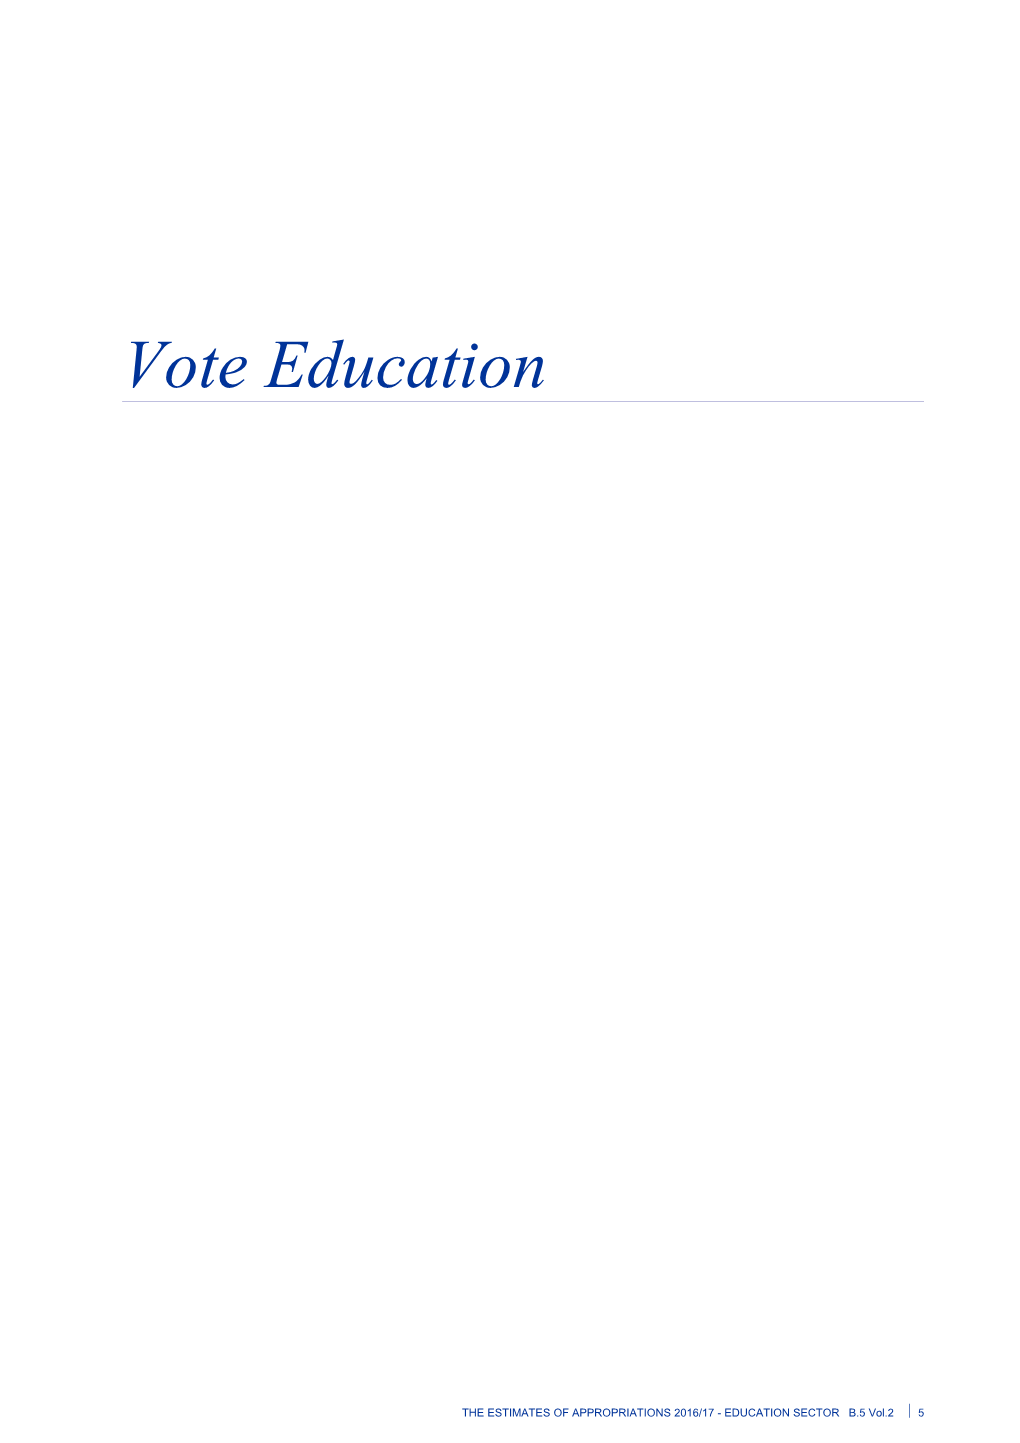 Vote Education - Vol 2 Education Sector - the Estimates of Appropriations 2016/17 - Budget 2016